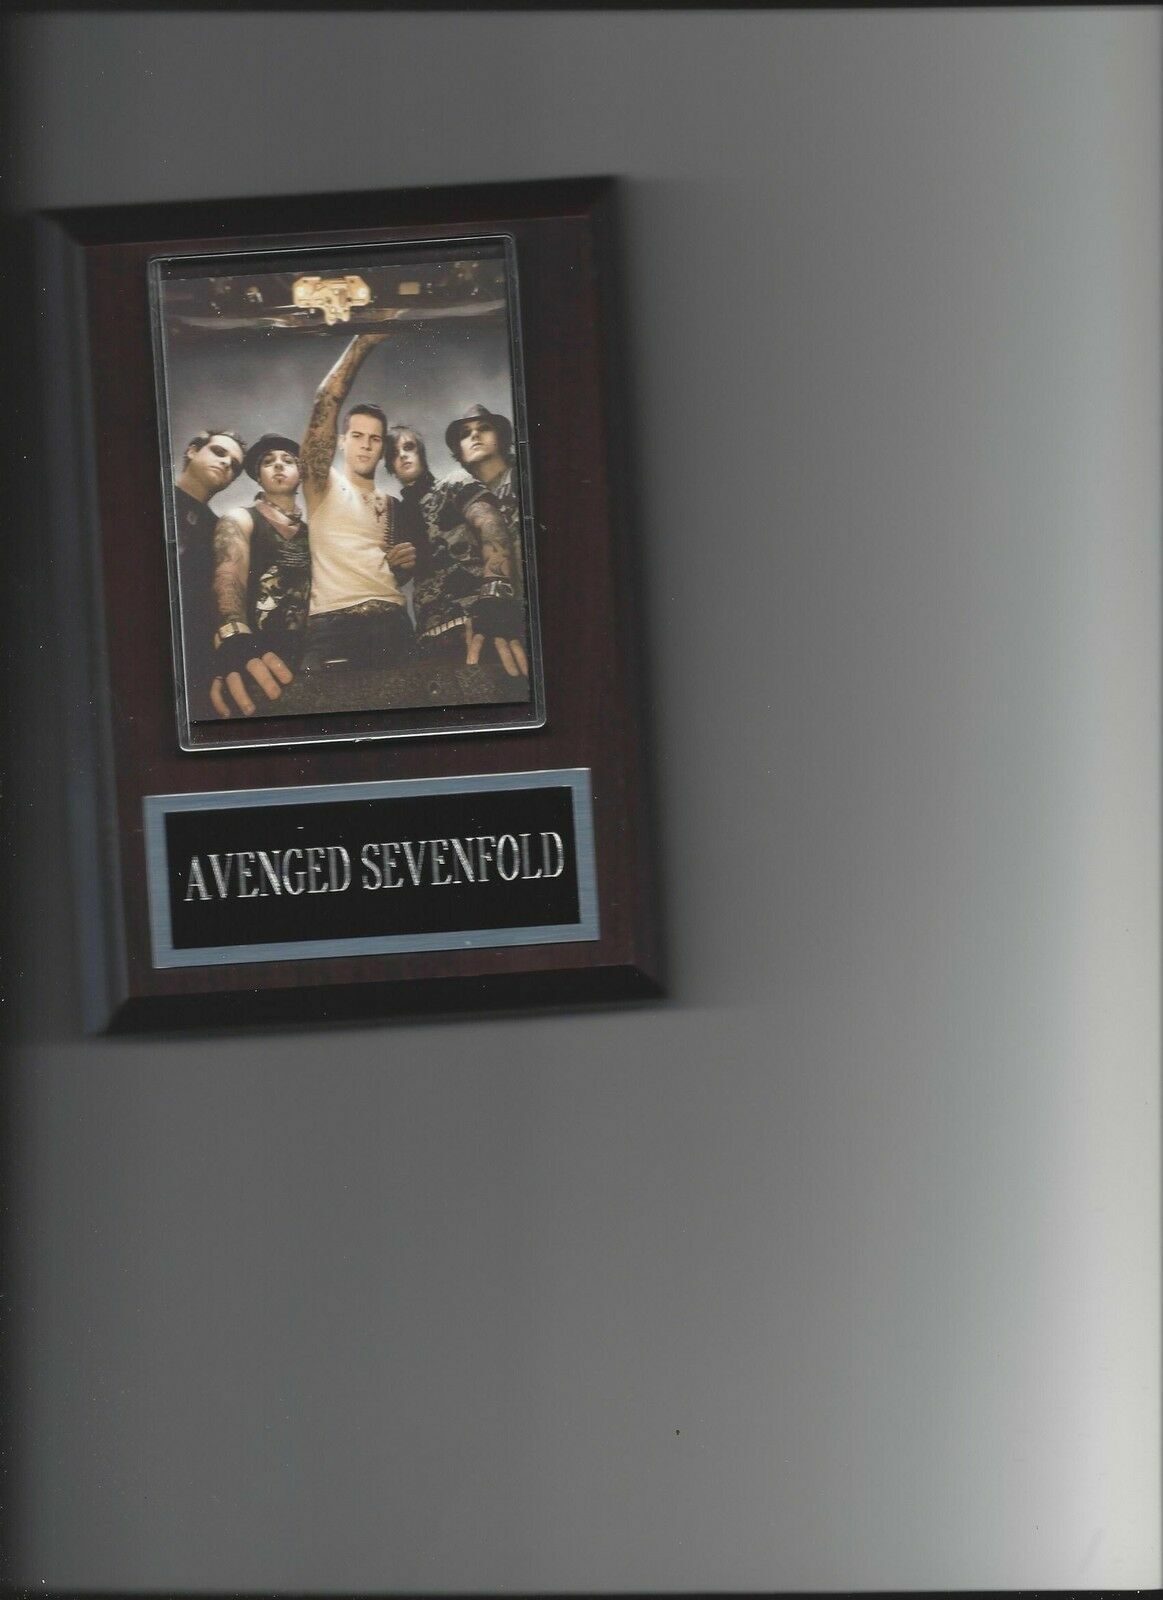 Award AVENGED SEVENFOLD PLAQUE Today's only MUSIC HARD BAND METAL ROCK THRASH